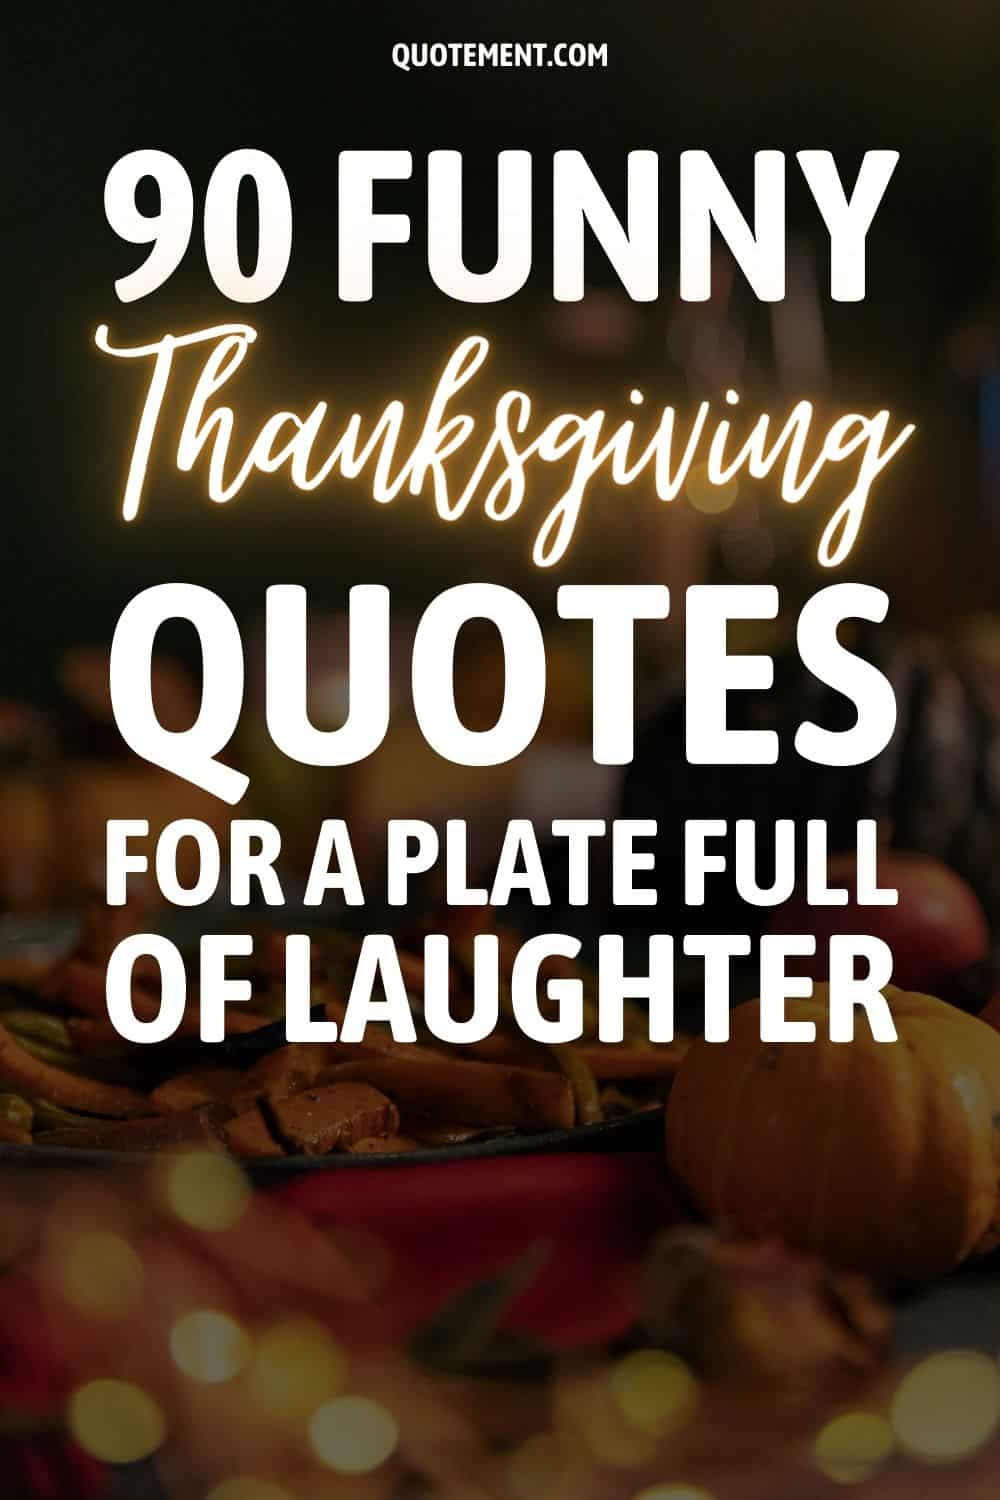 90 Funny Thanksgiving Quotes For A Plate Full Of Laughter
